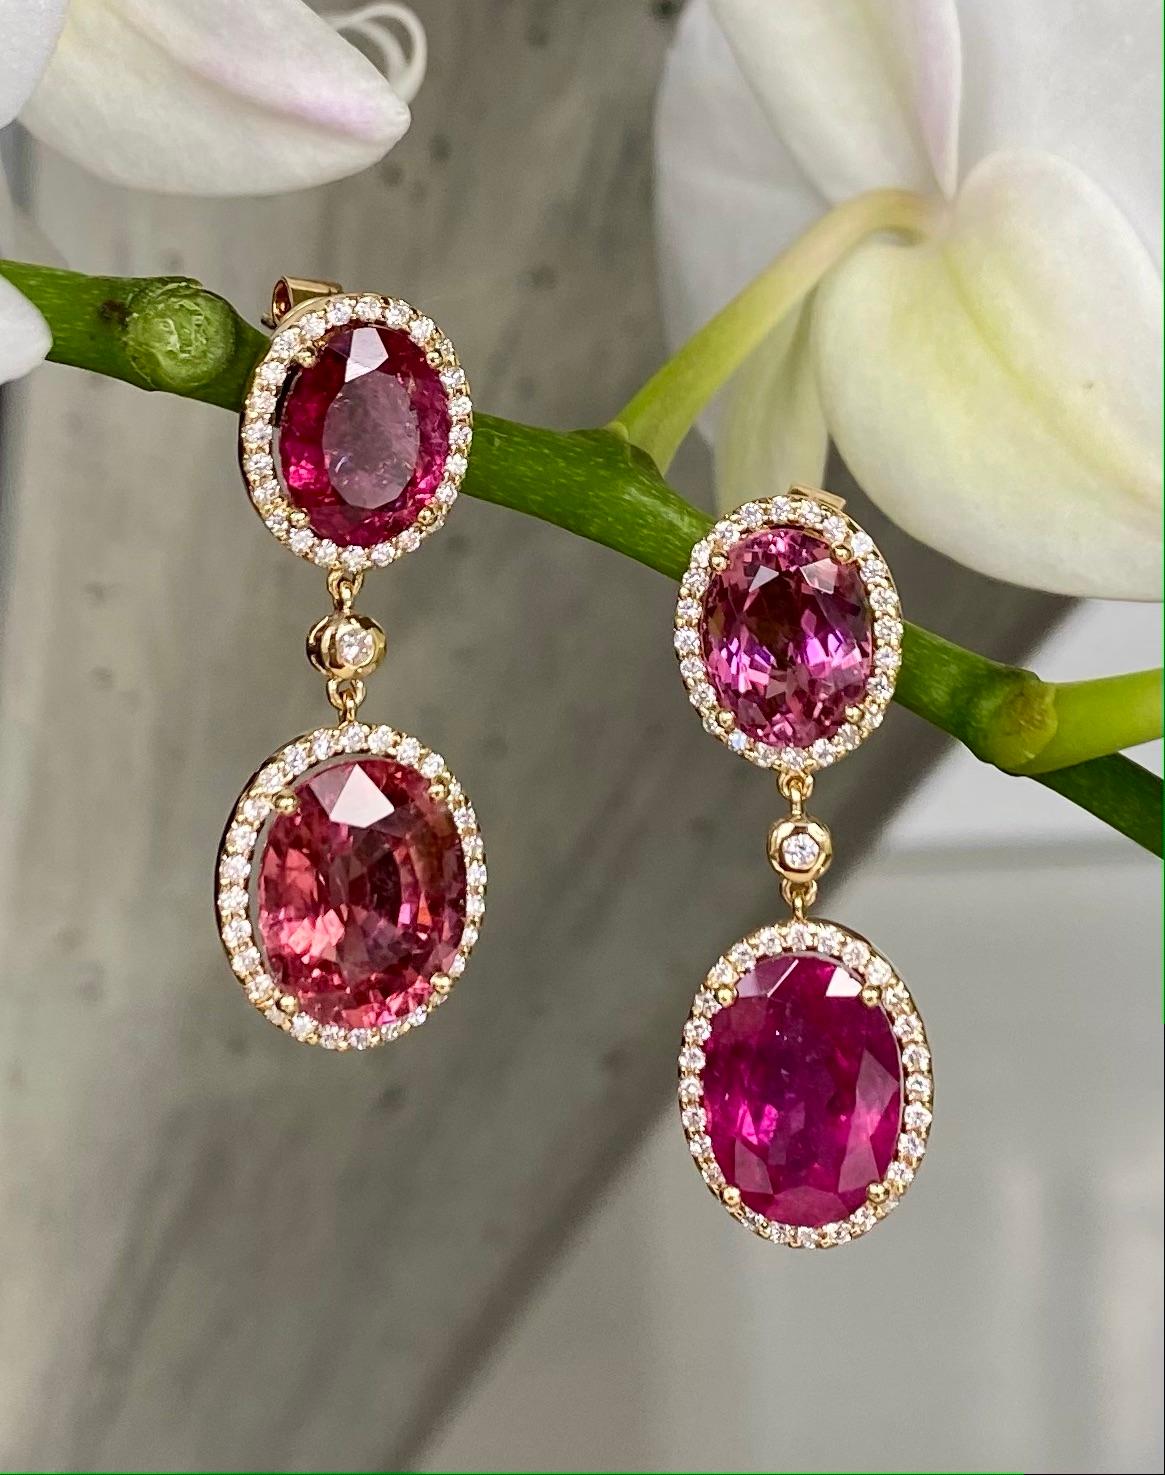 One-of-a-kind rubellite, multi-pink tourmalines and diamond drop dangle earrings, handcrafted in 18 karat yellow gold.

These are luxurious, beautiful dangle earrings of velvety crimson rubellites and pink tourmalines encircled by brilliant